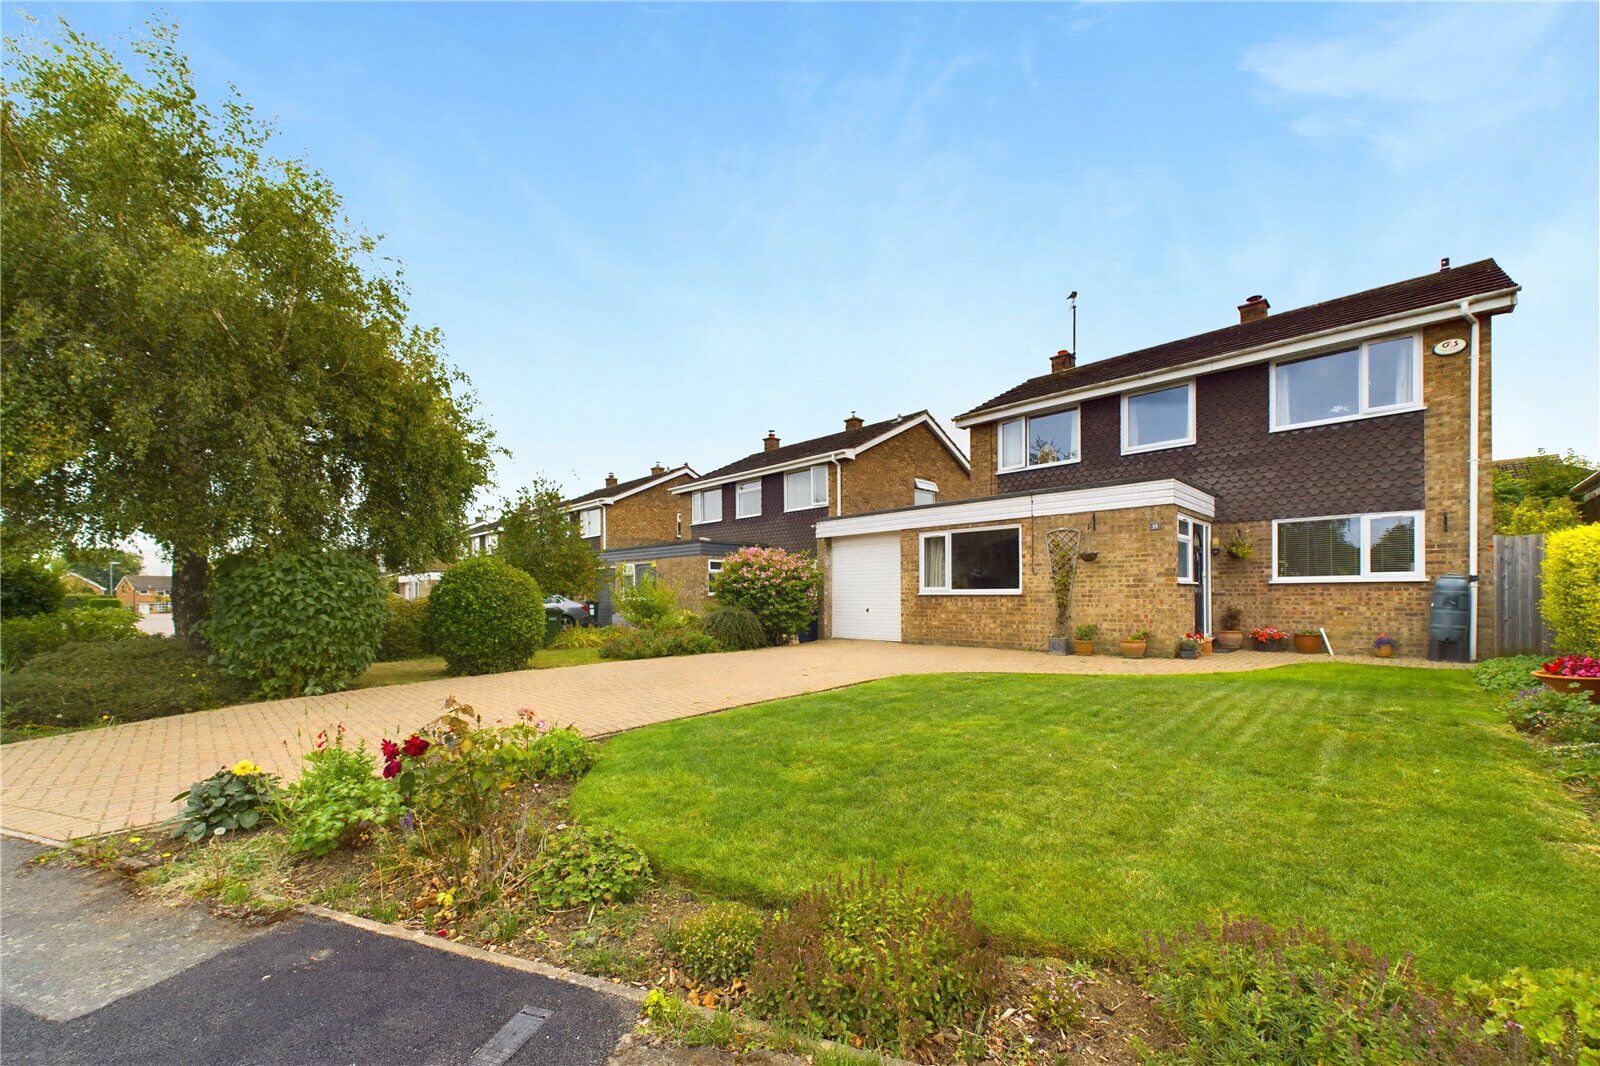 4 bedroom detached house for sale Beachampstead Road, Great Staughton, PE19, main image